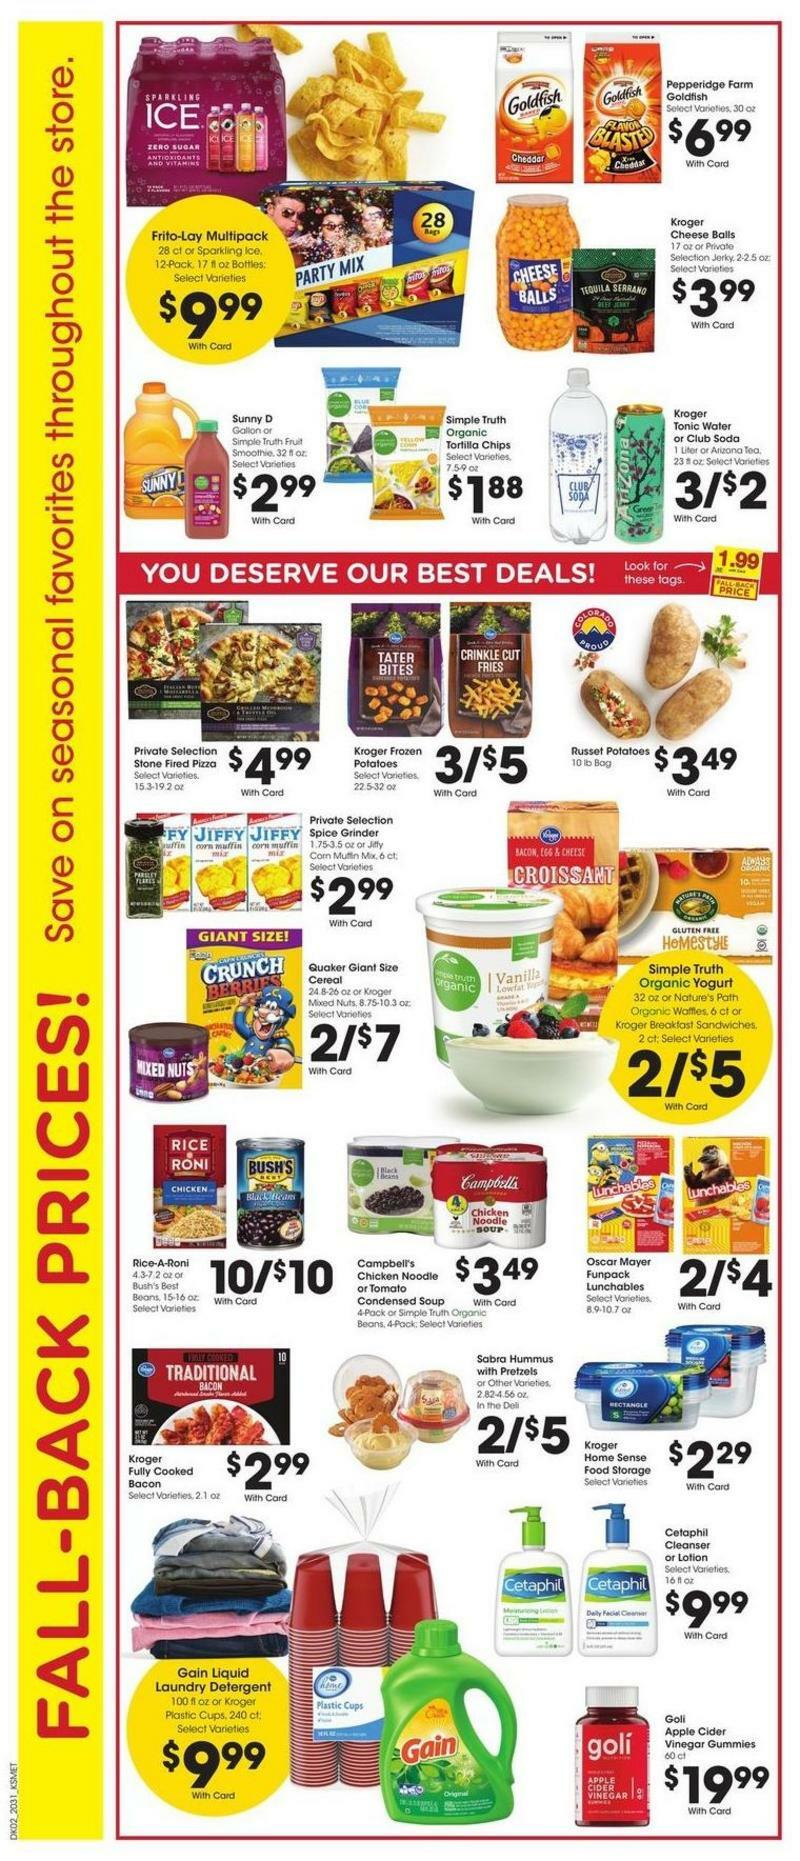 City Market Weekly Ad from September 2